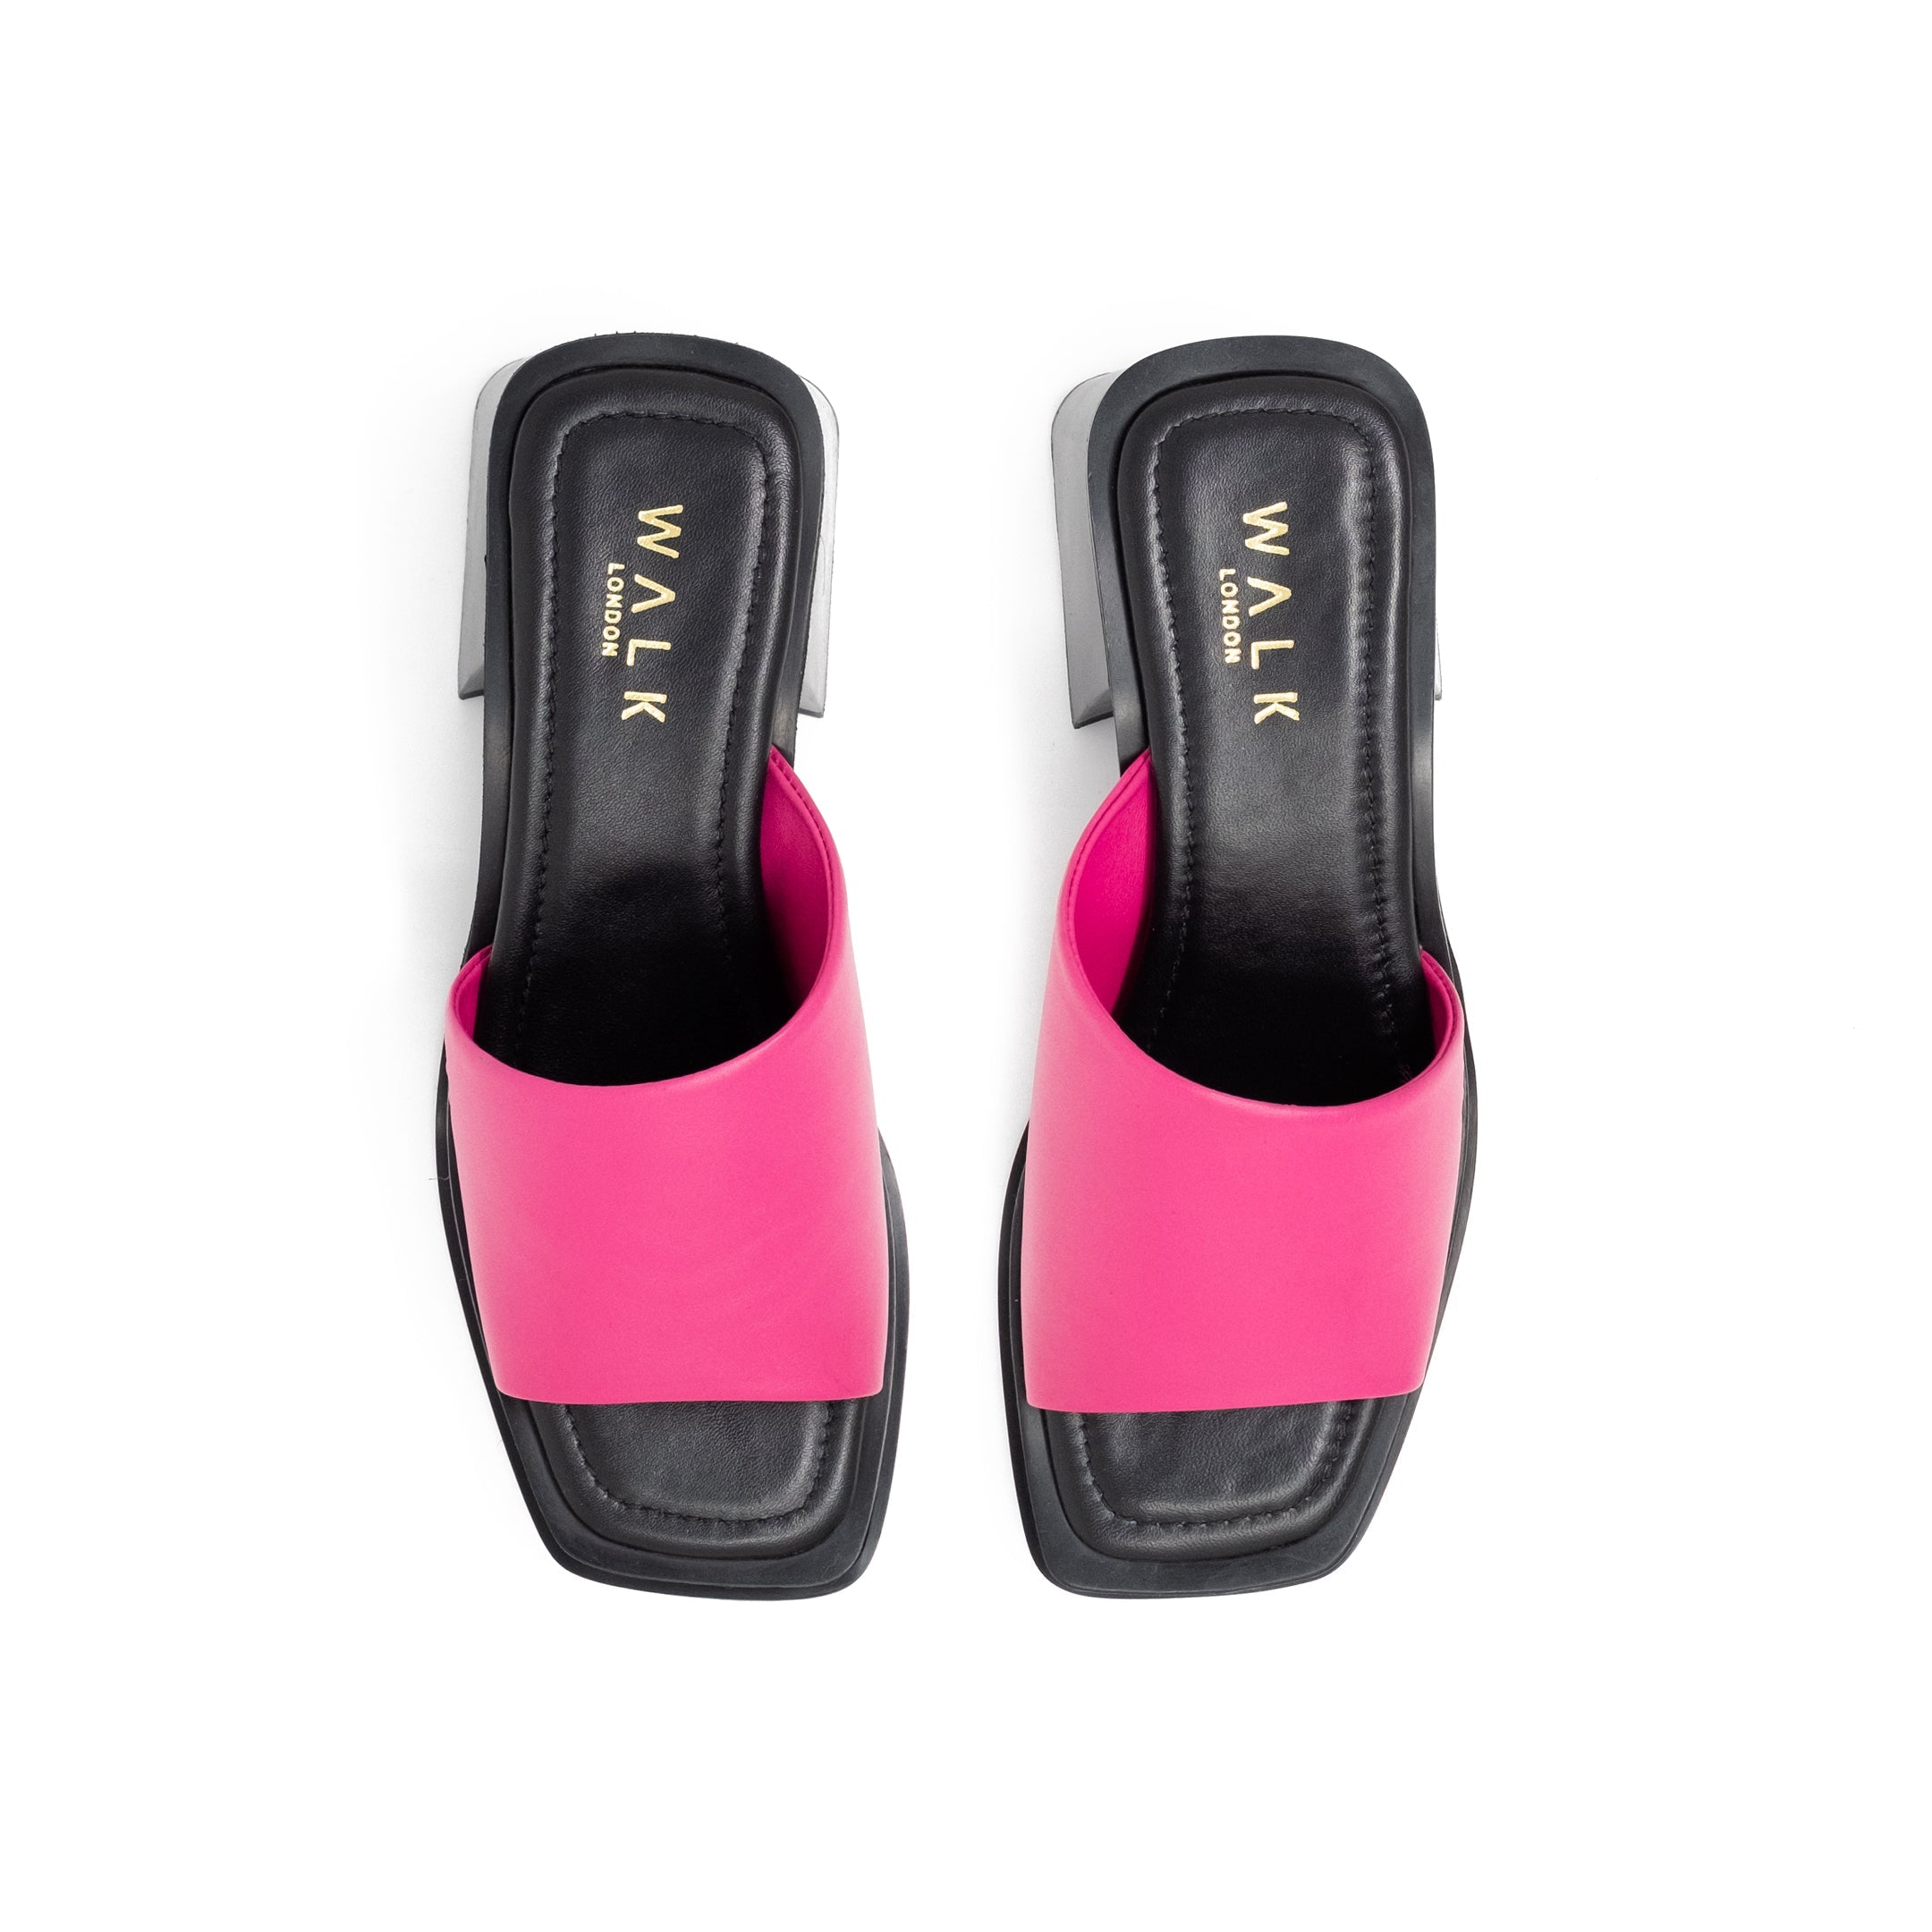 Birdseye View of the Walk London Lily Mule Sandal in Hot Pink Leather